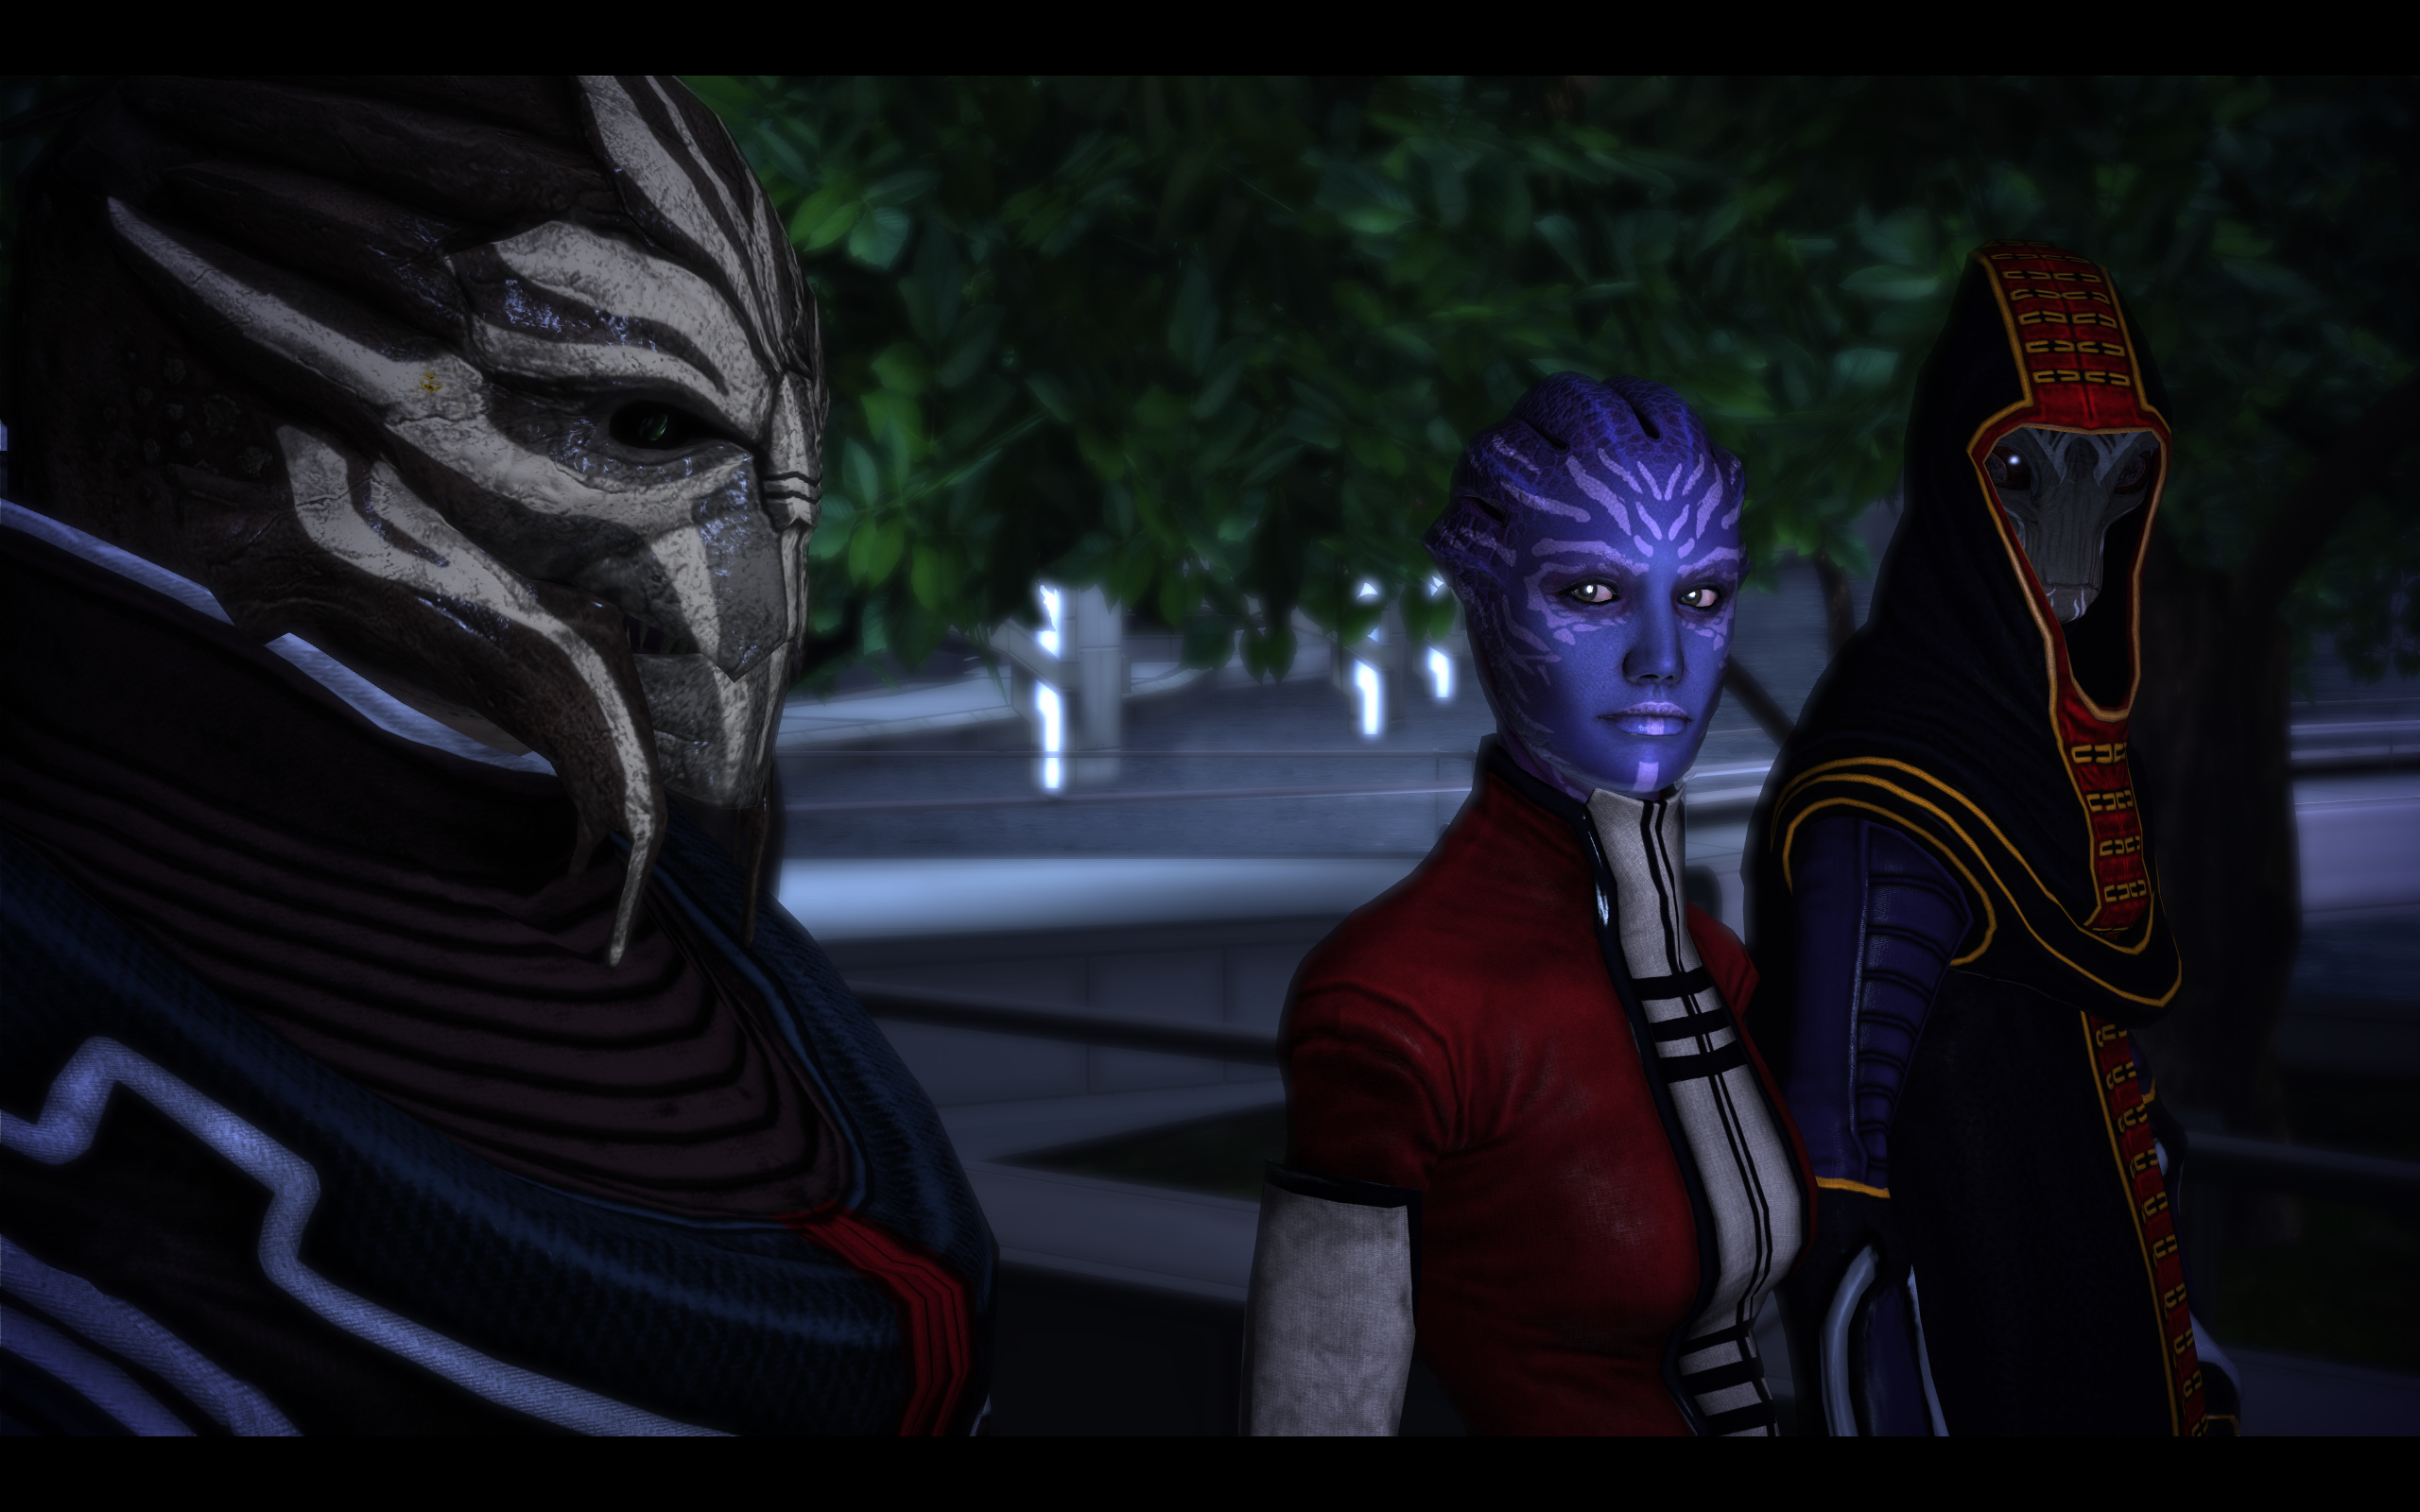 Faces look terrible, though Mass Effect has always had terrible looking fac...